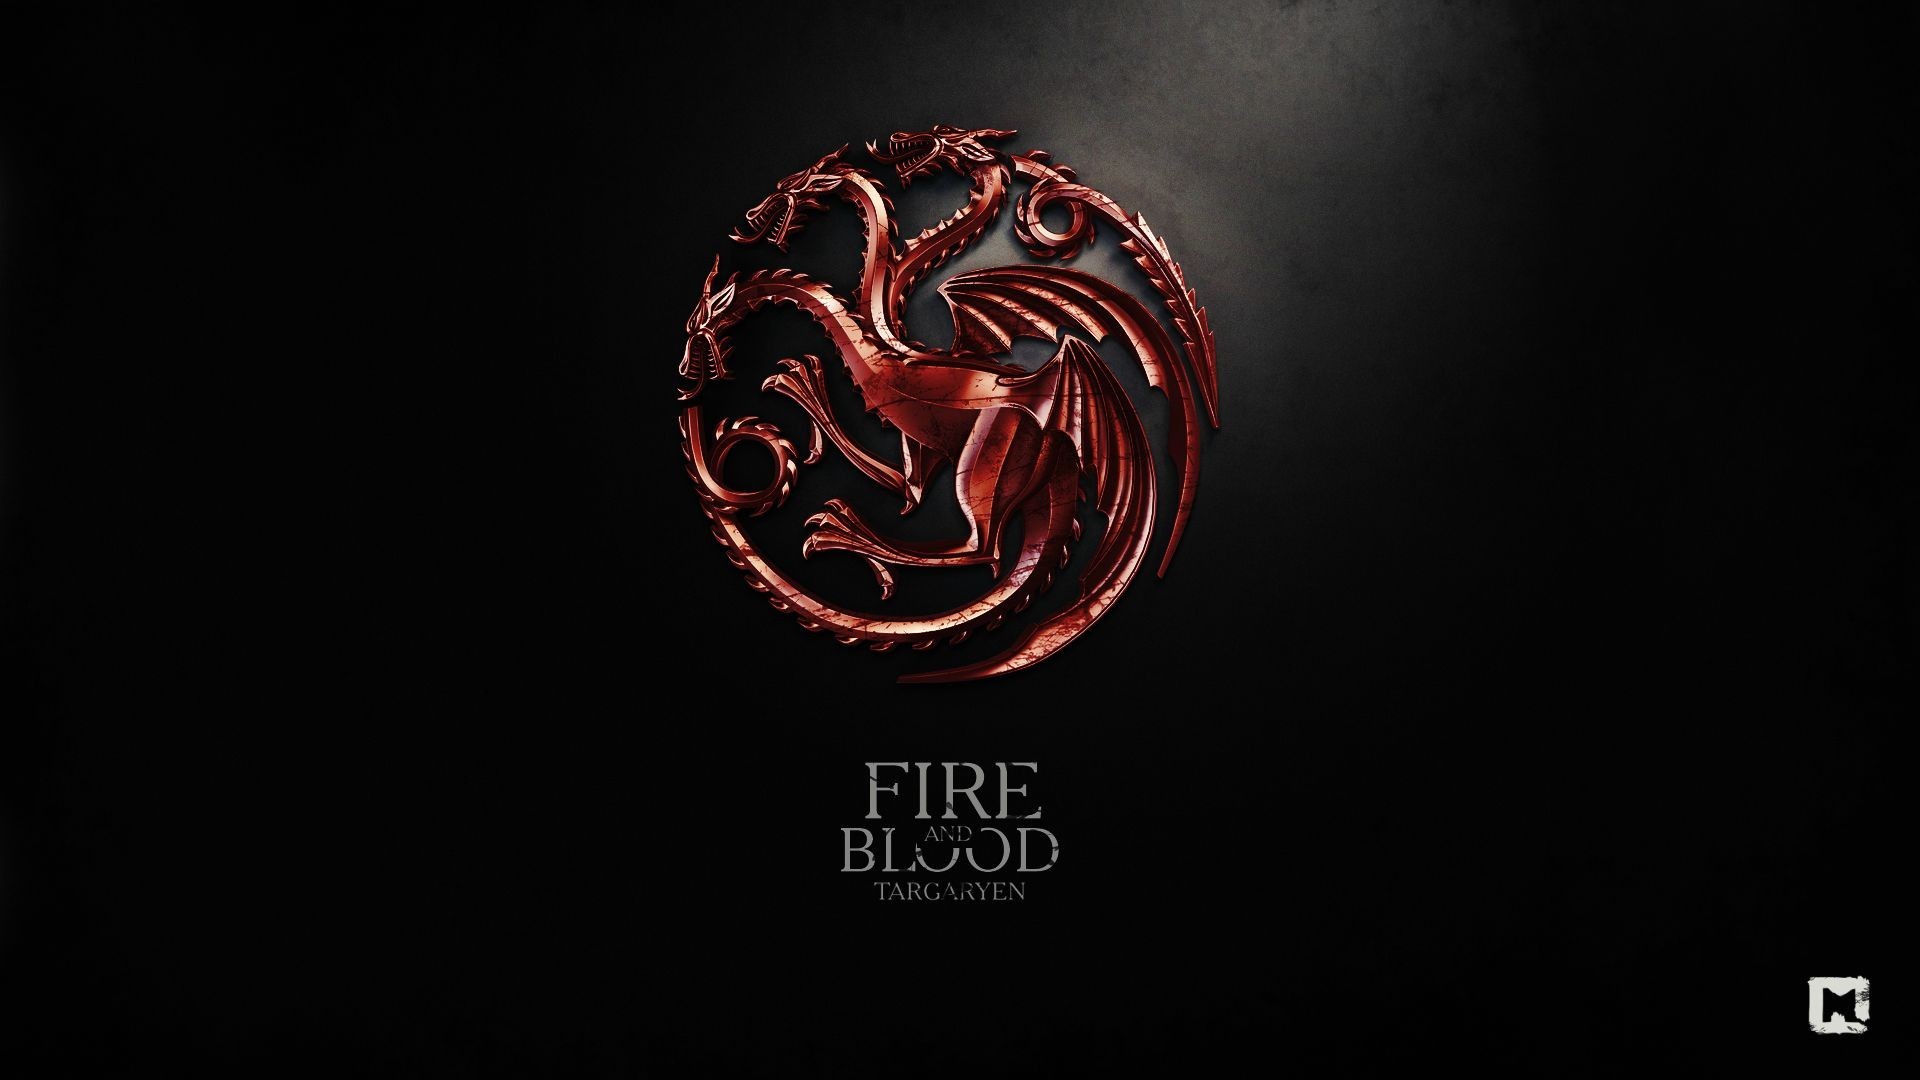 Game Of Thrones A Song Of Ice And Fire Digital Art Sigils 1920x1080